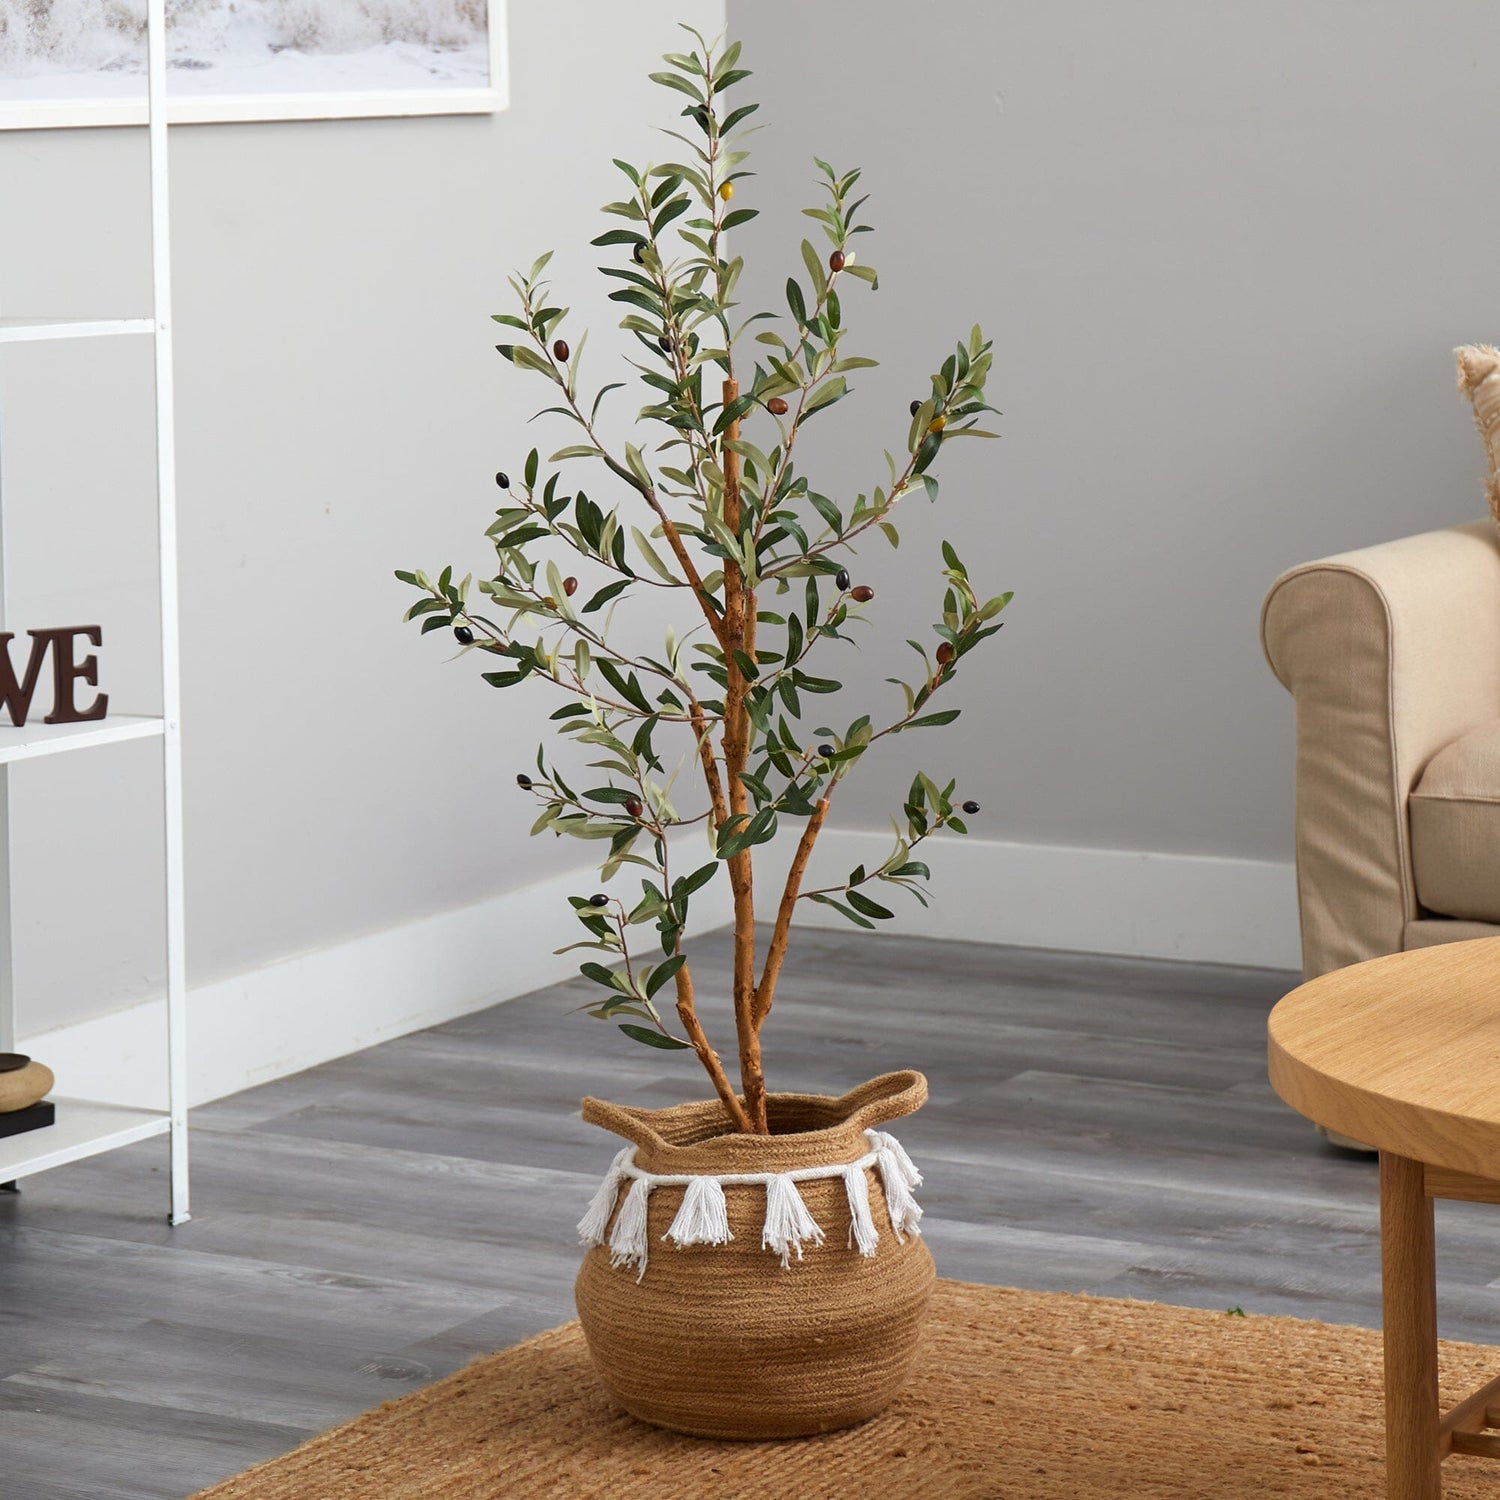 3.5’ Artificial Olive Tree with Handmade Jute & Cotton Basket with Tassels